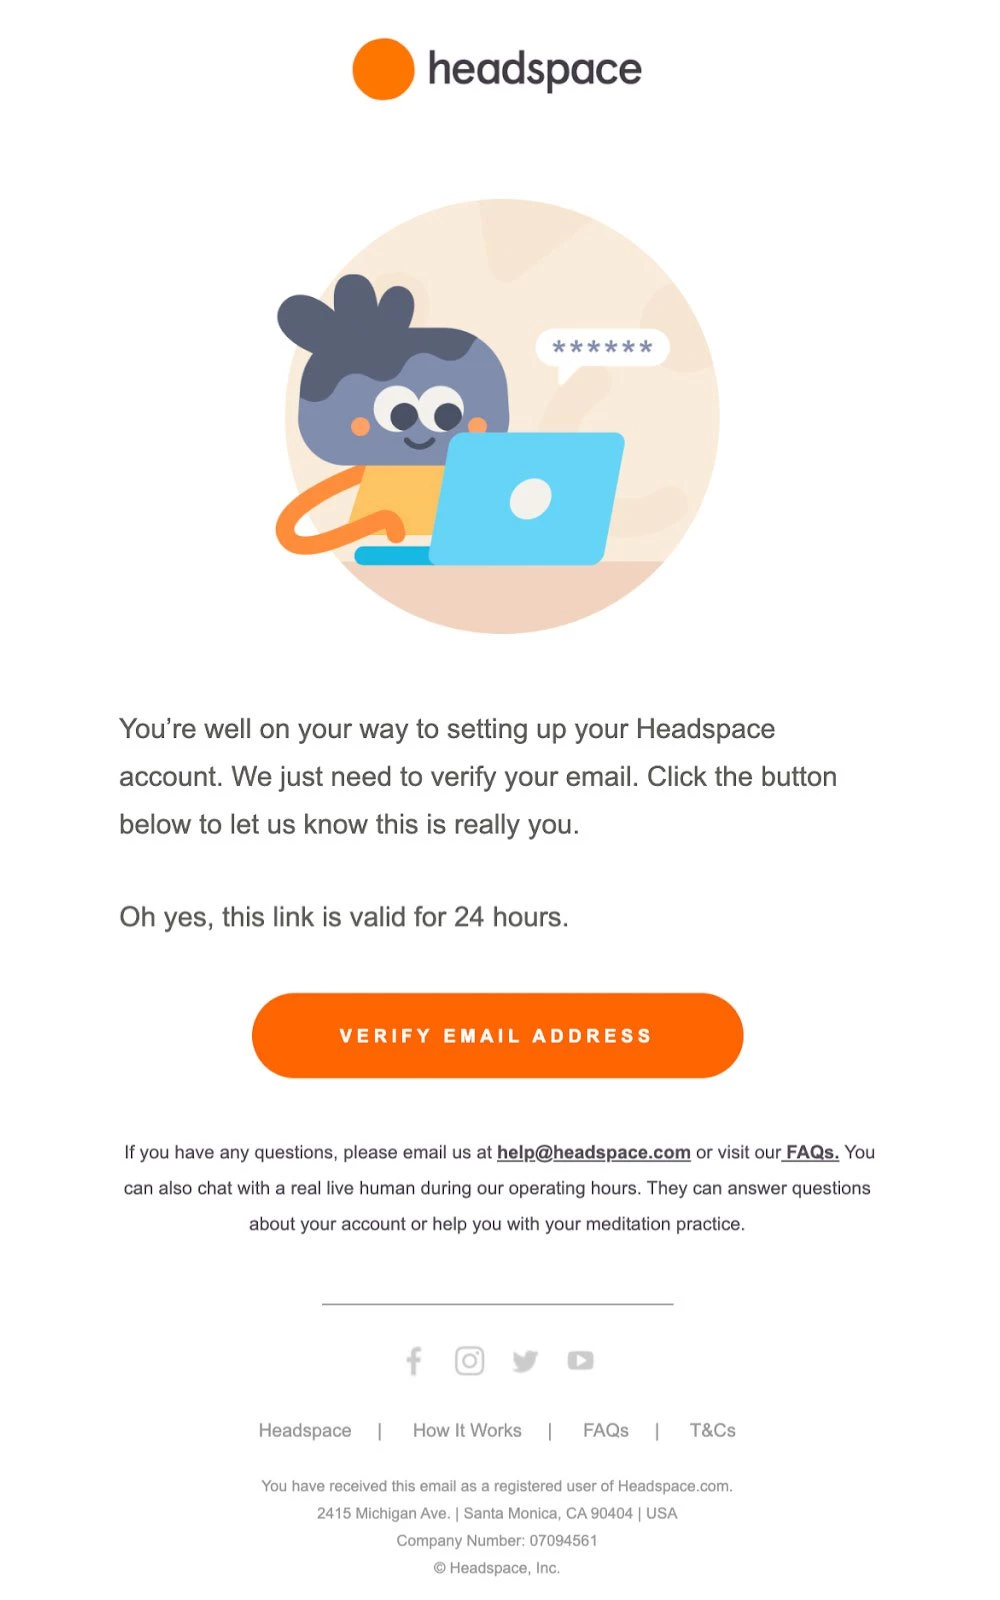 headspace verify your email address cta button orange transactional email example